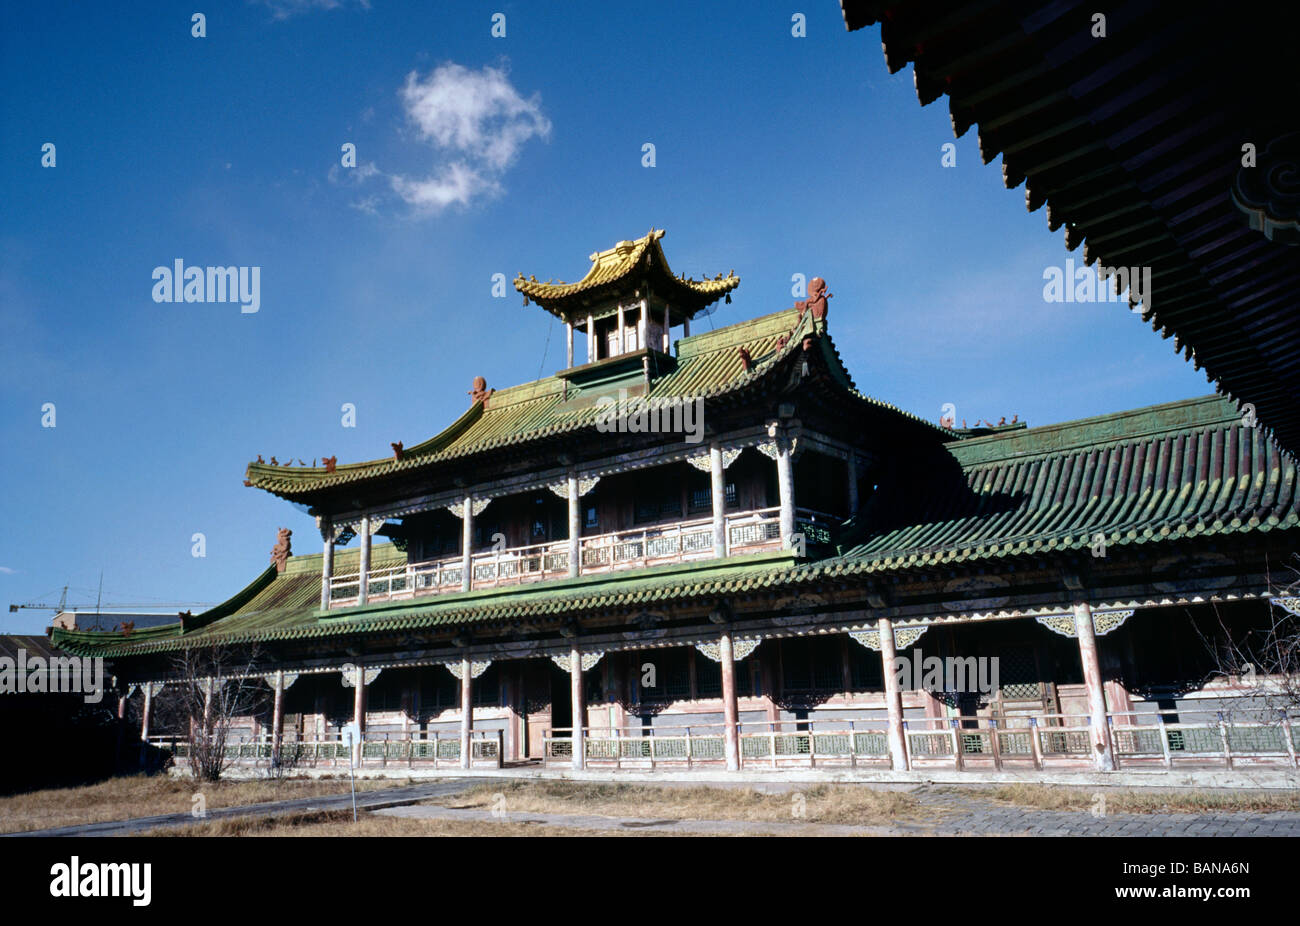 Oct 16, 2006 - One of the six temples at the Winter Palace of Bogd Khaan in the Mongolian capital of Ulaan-Baatar Stock Photo